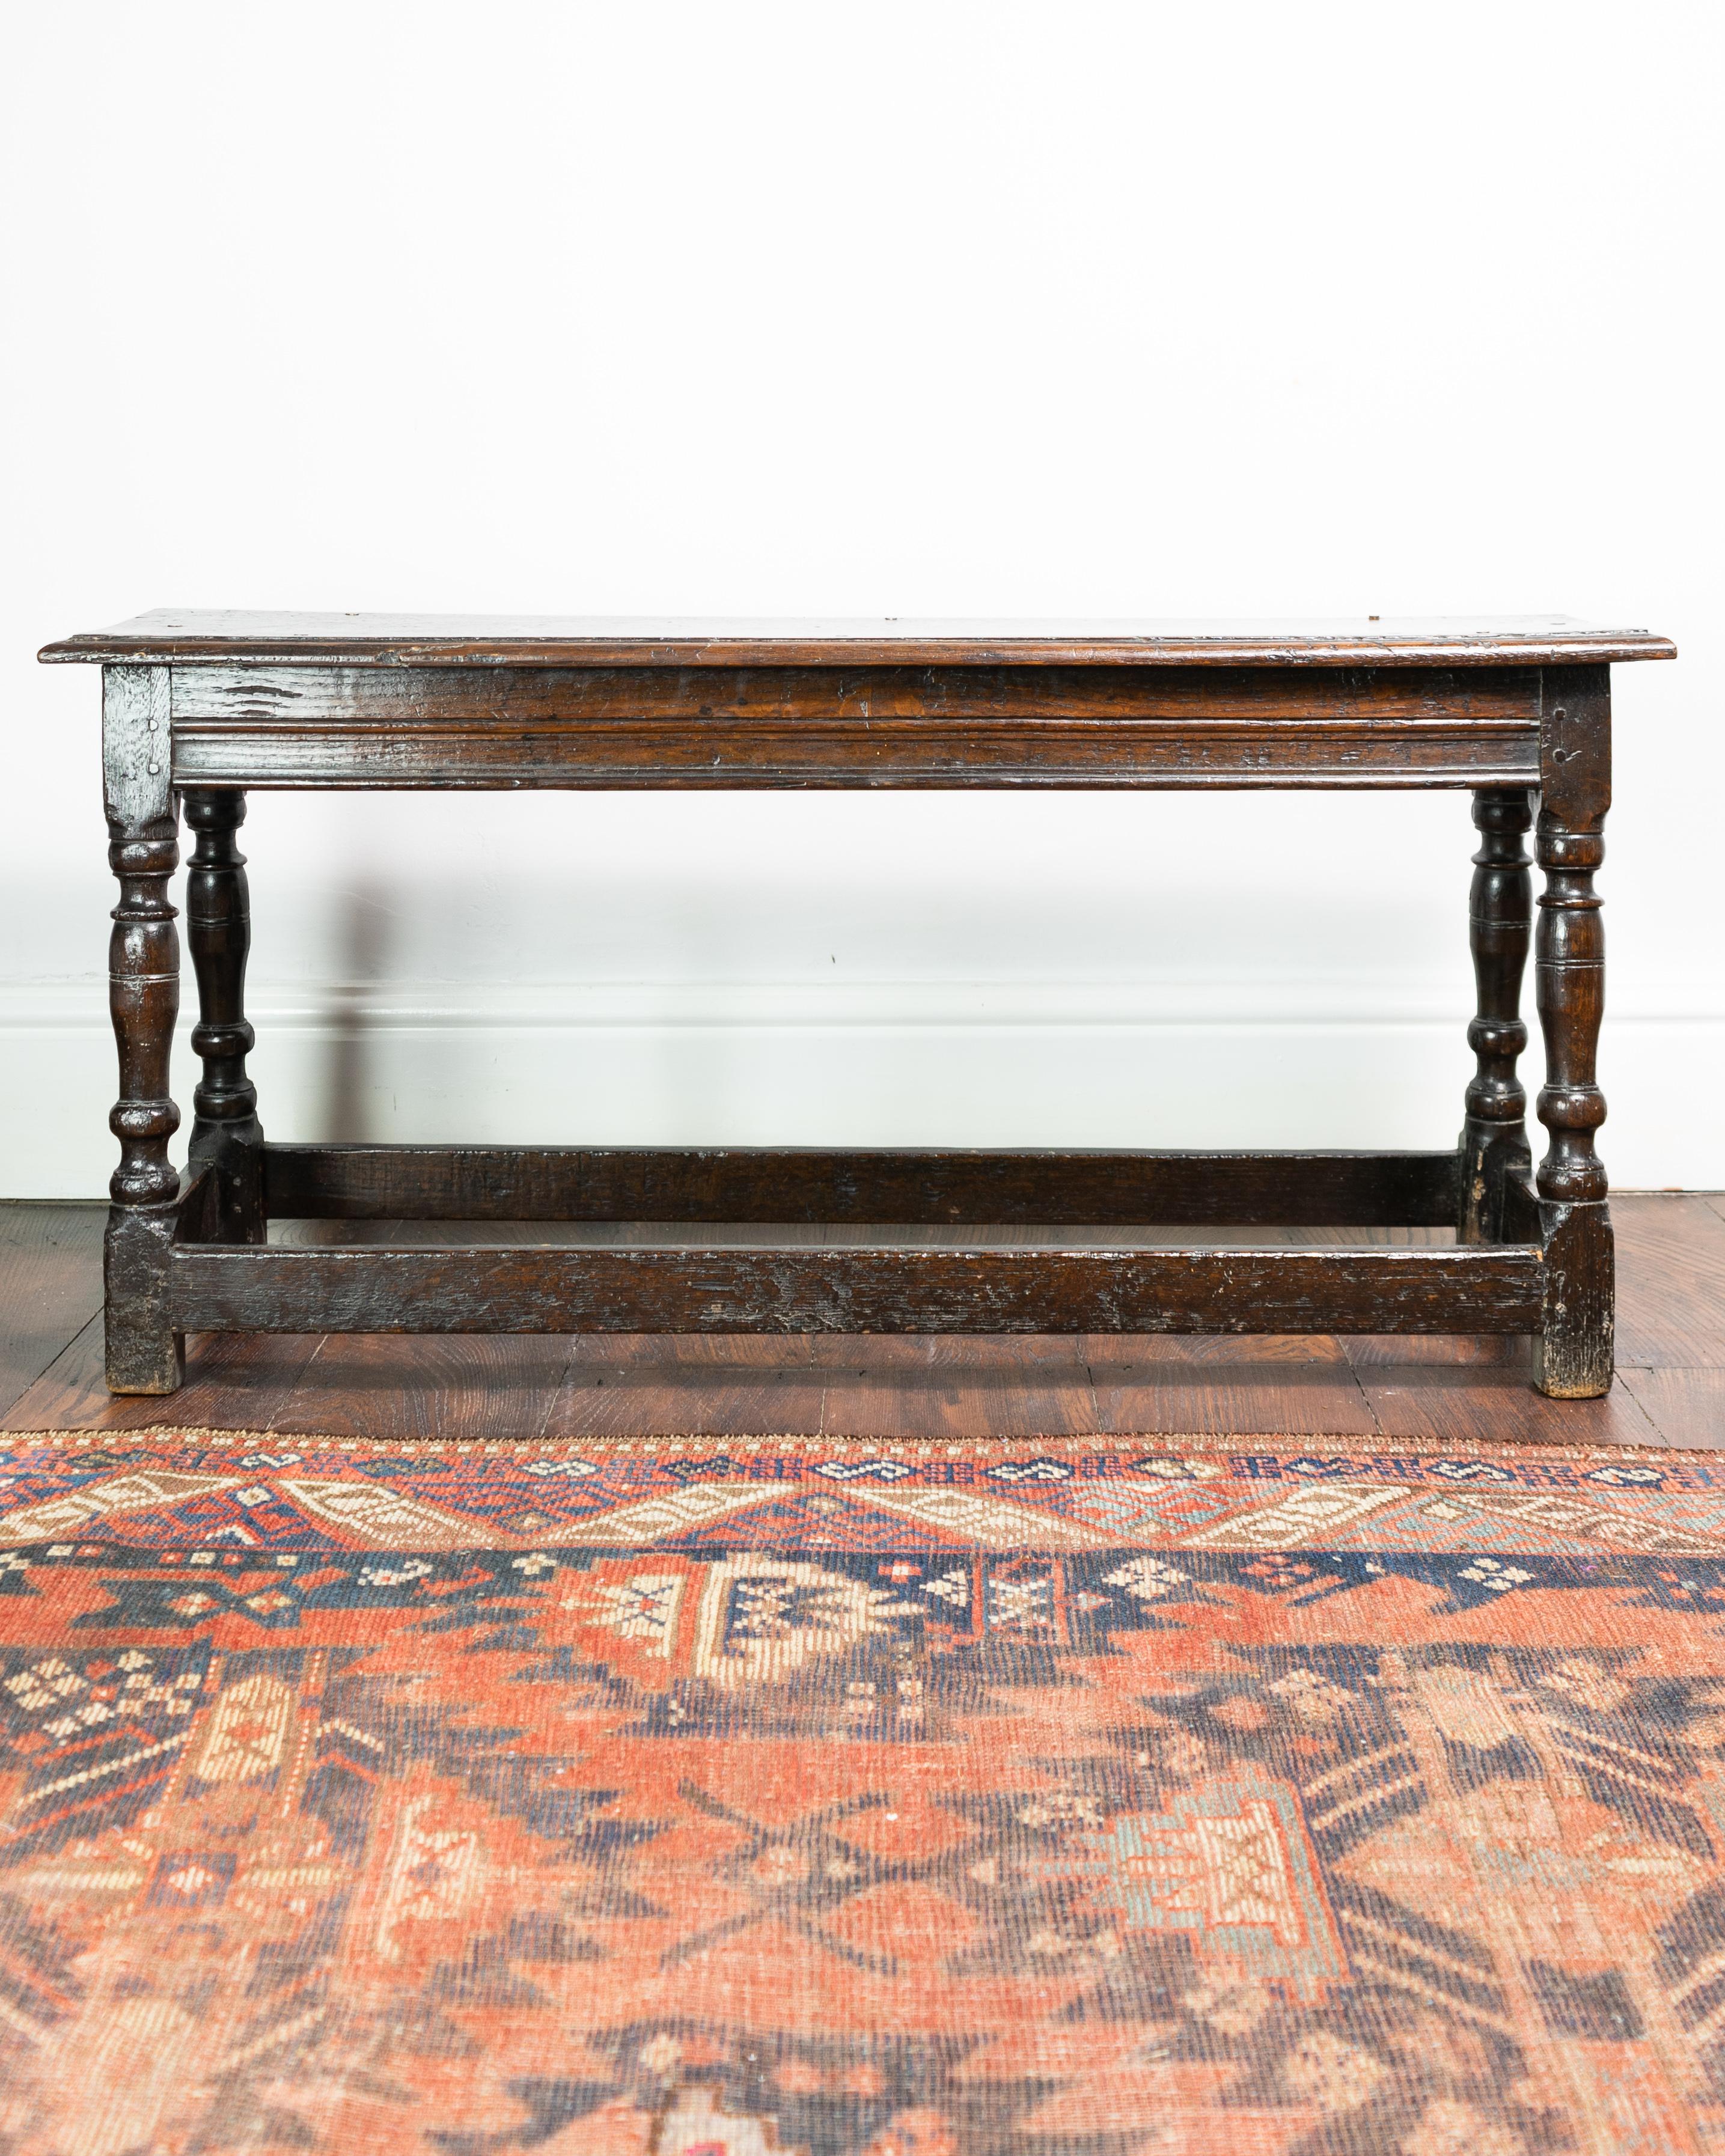 Elizabethan 17th Century, James I Joined Oak Bench, England, Circa 1603 - 1625 For Sale